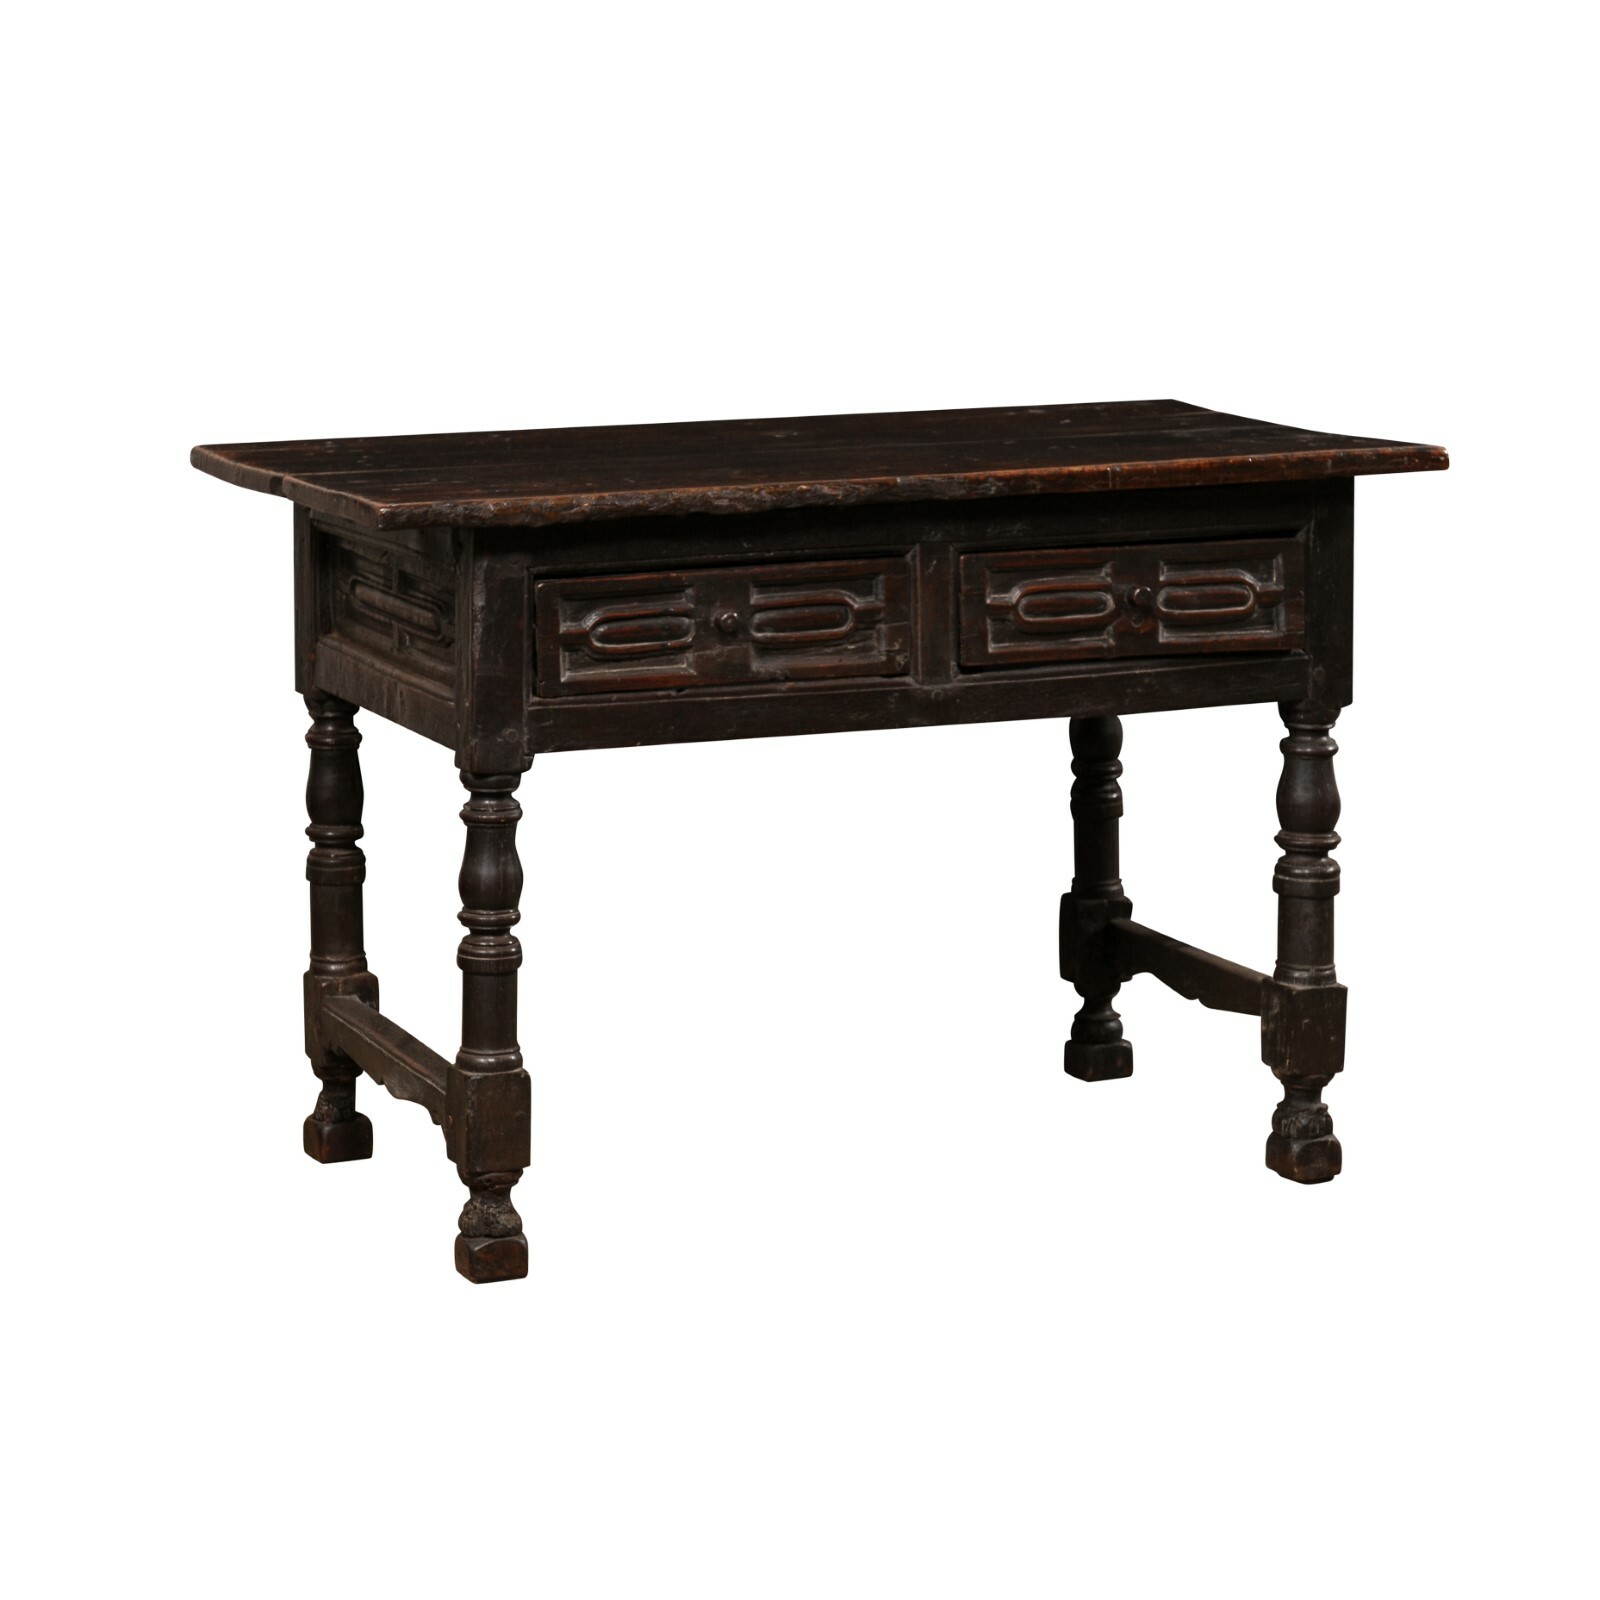 Early 18th C. Italian Carved-Walnut Table 